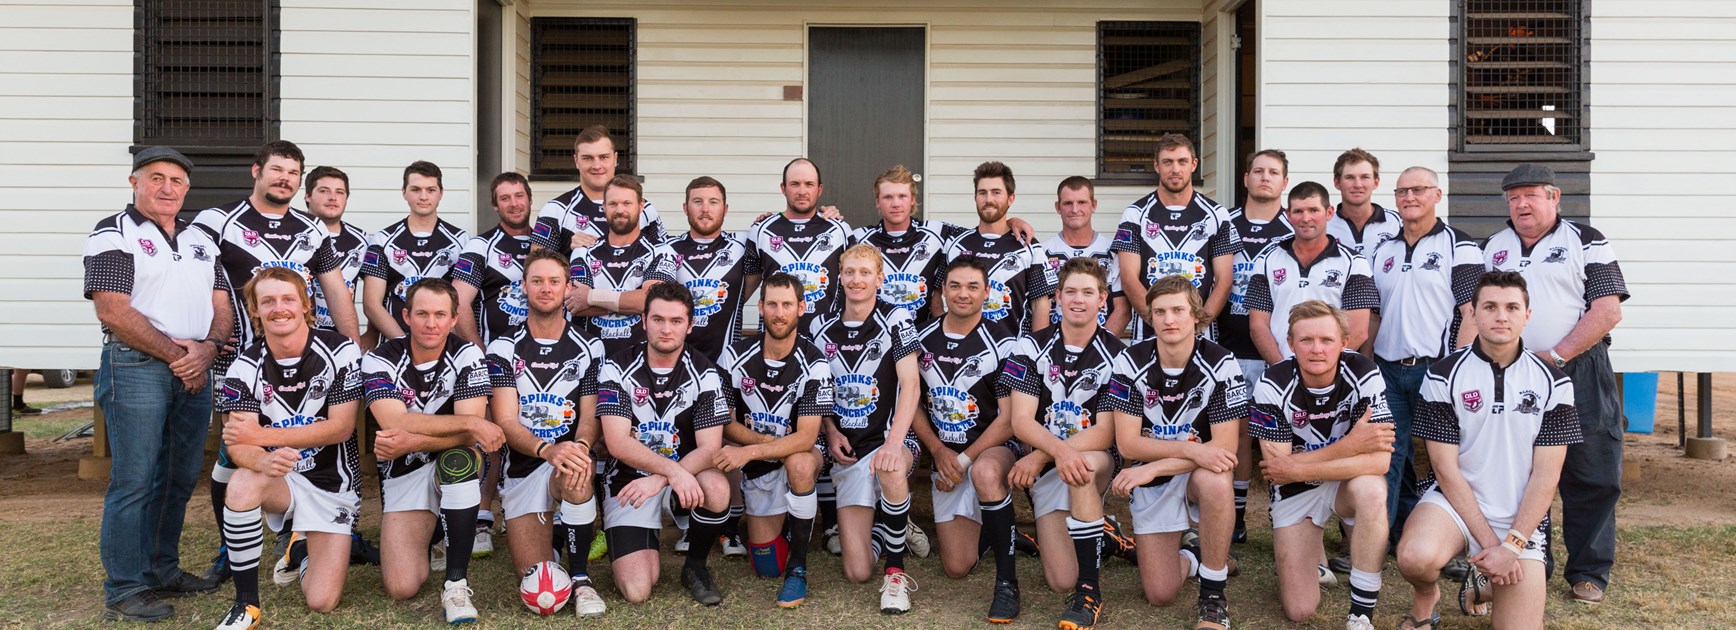 Blackall Magpies fly high with community win